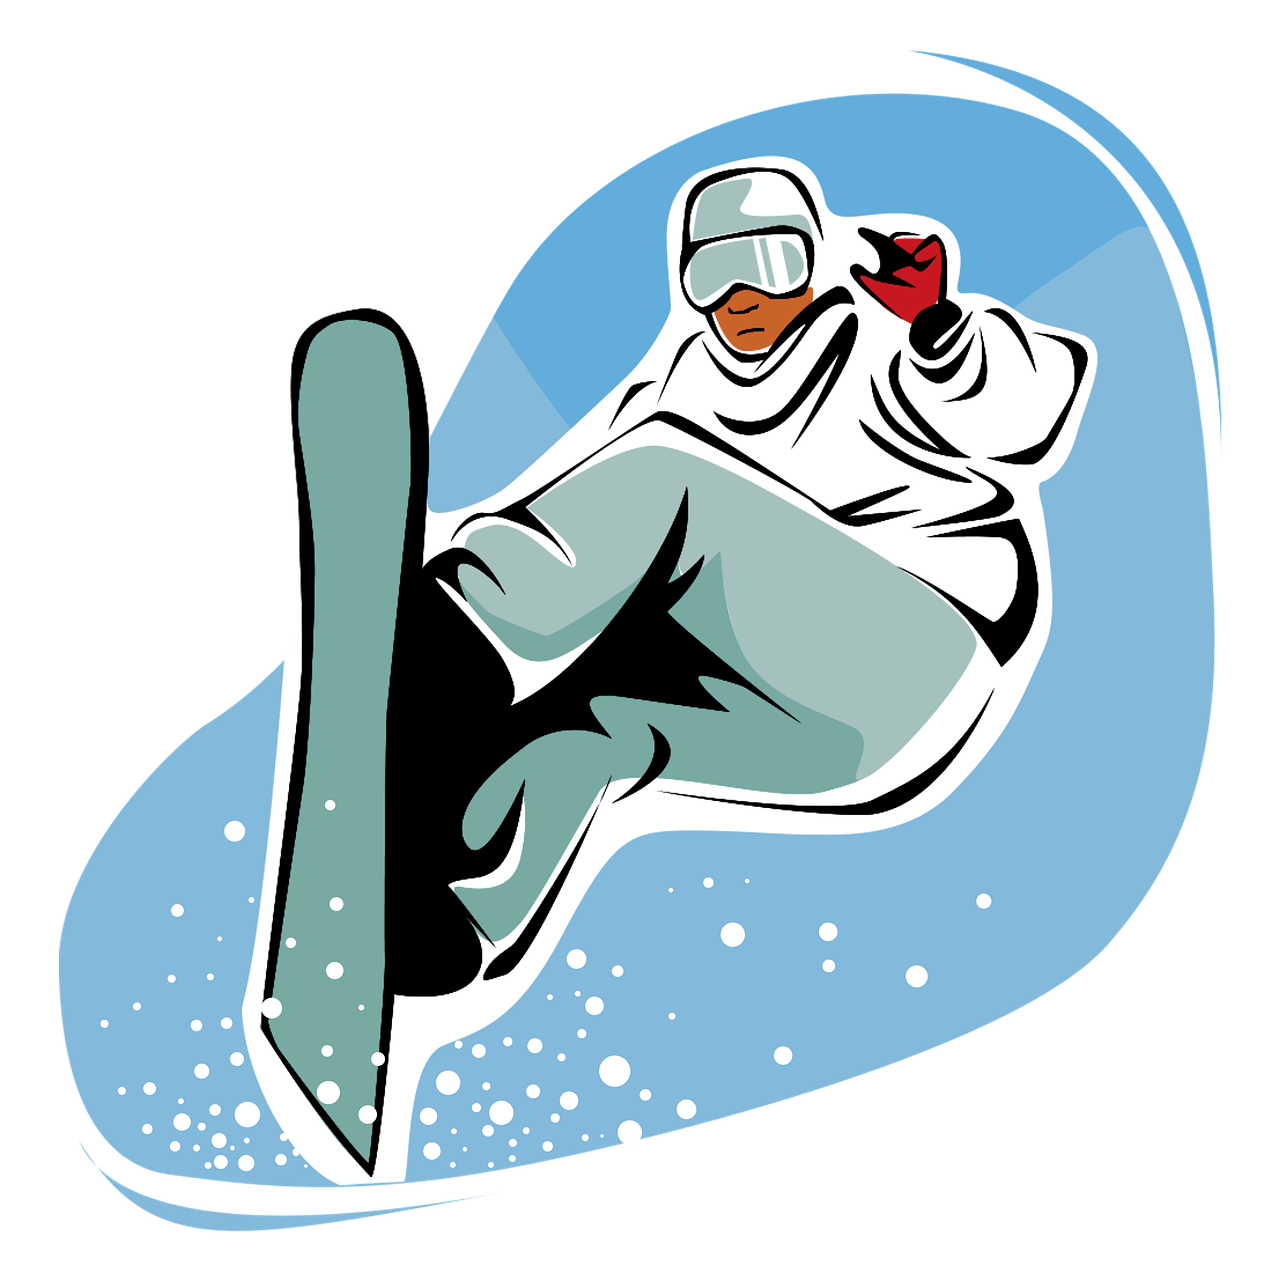 Skiing clipart snowboarding.